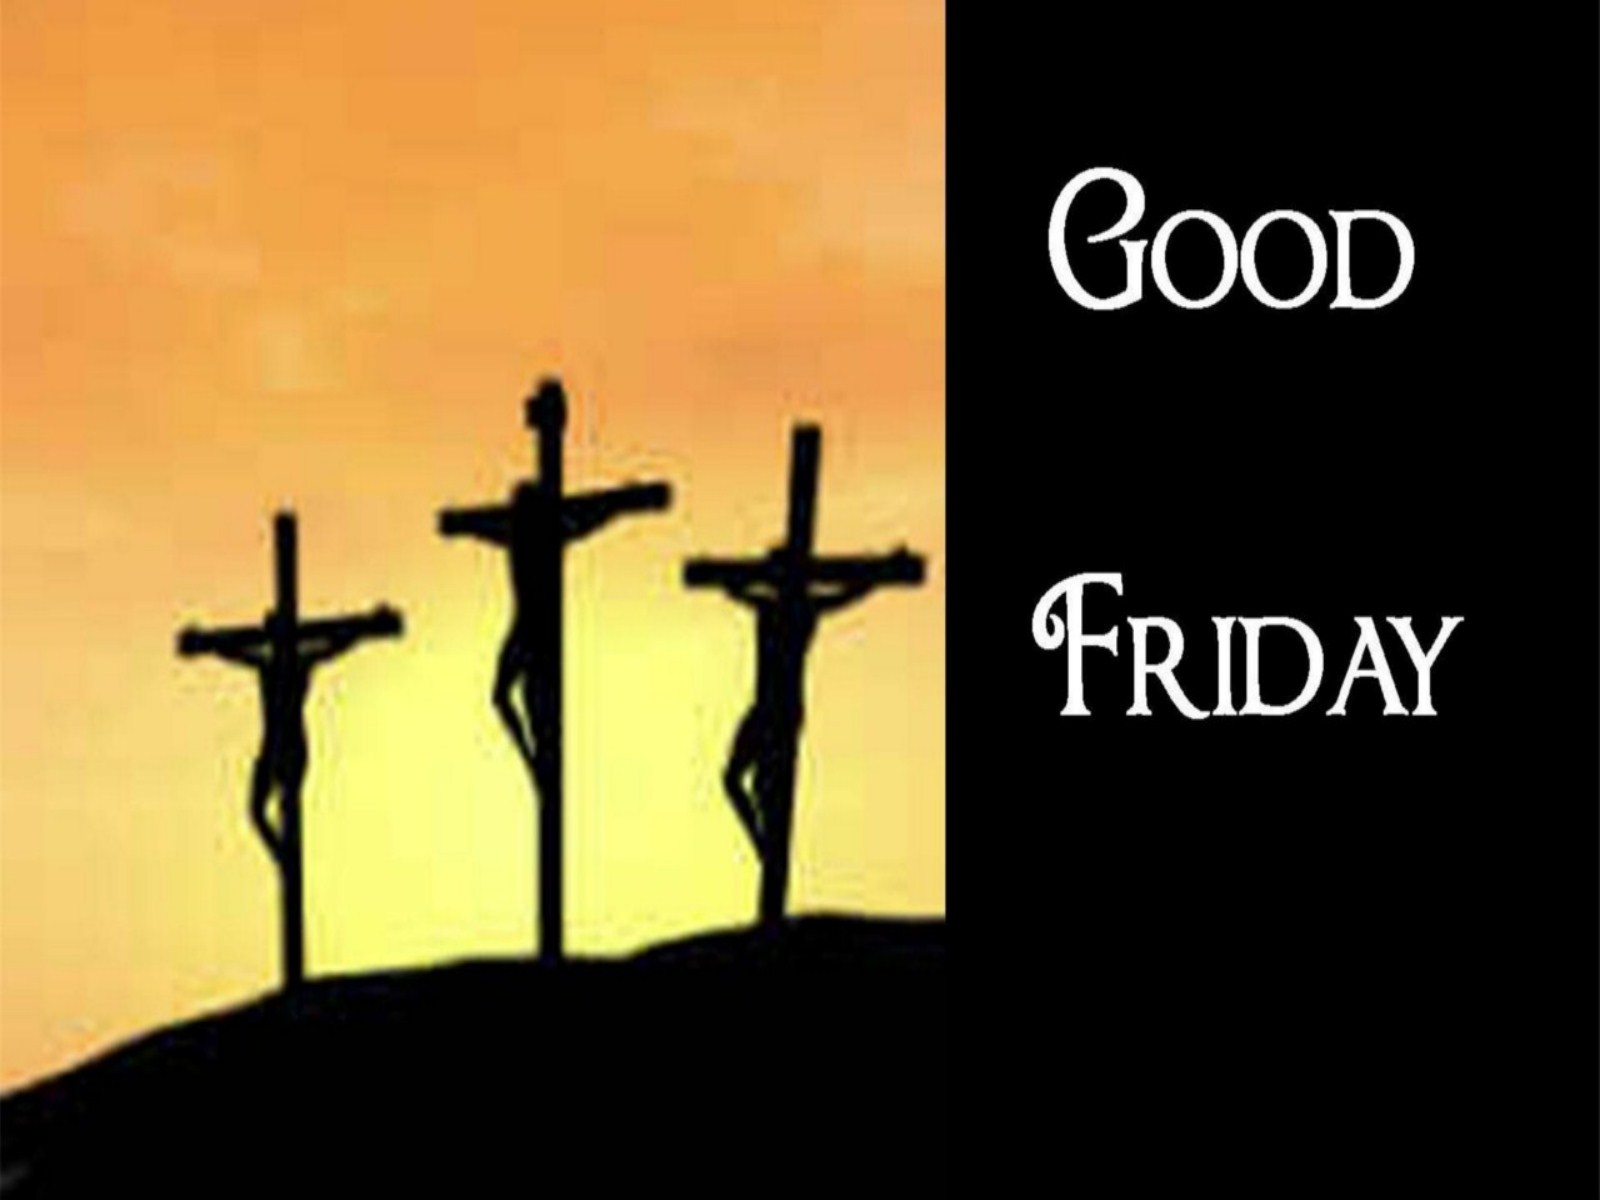 free clipart images good friday - photo #11